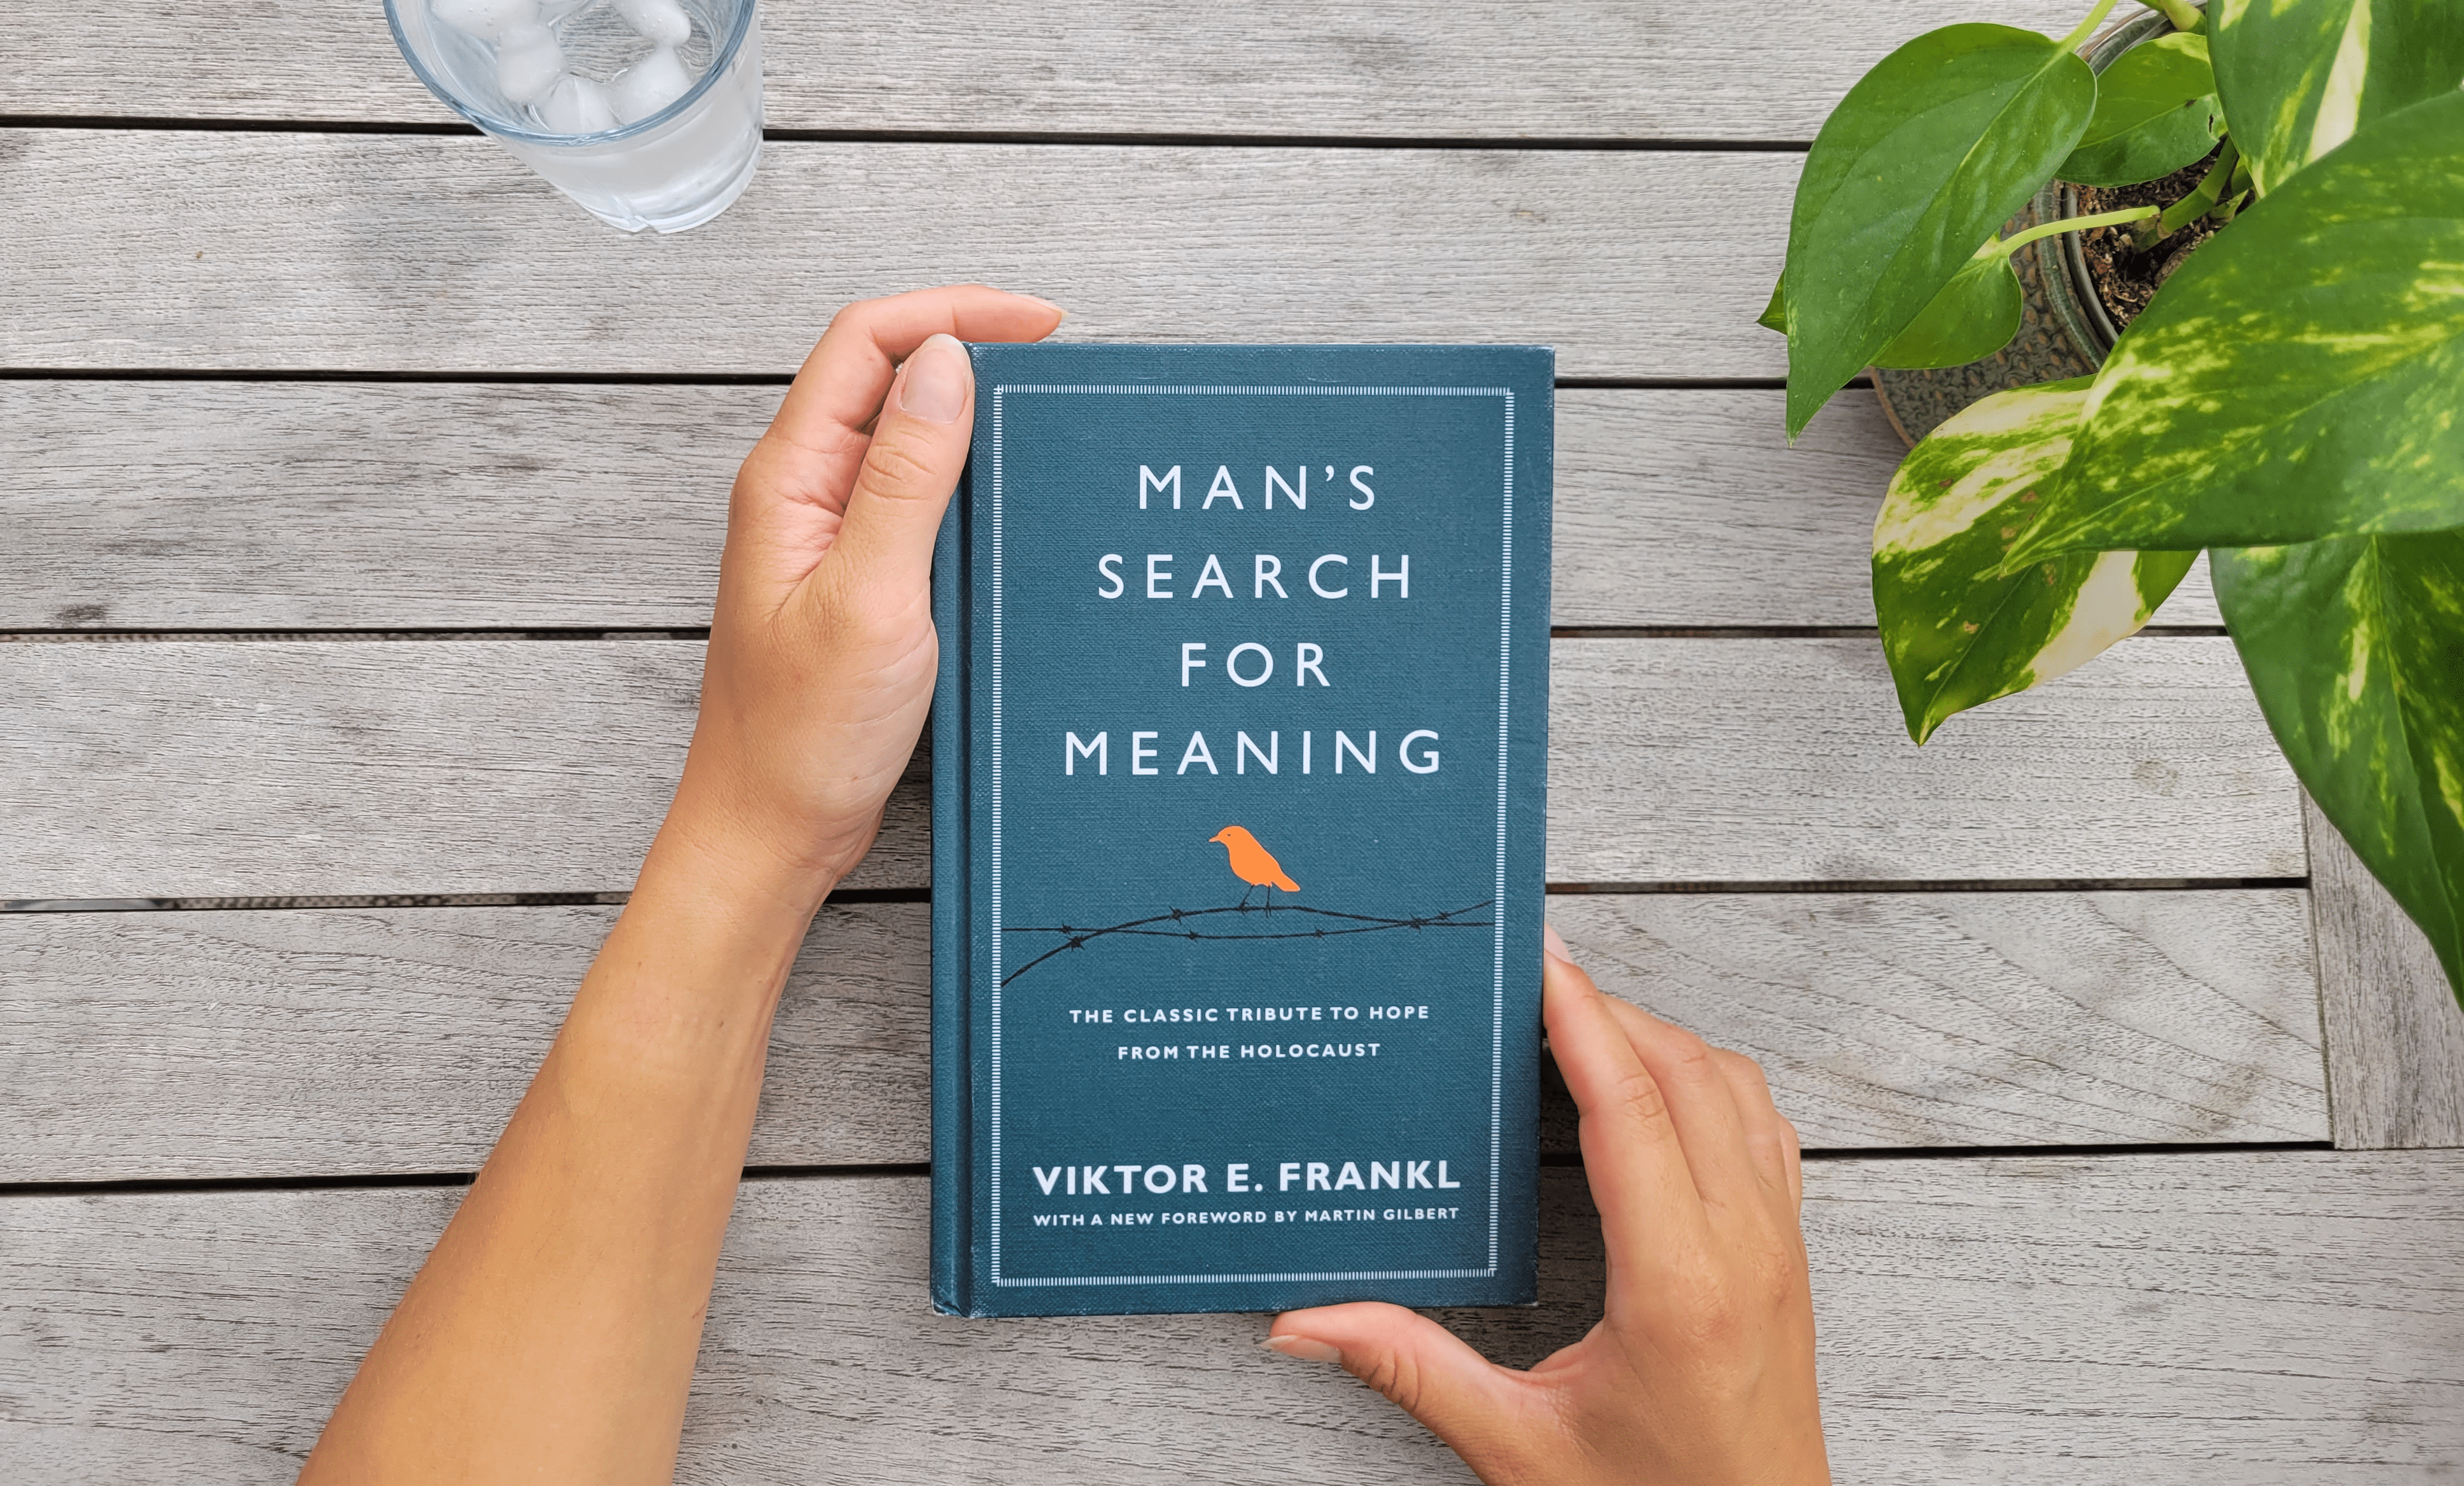 Summary: Man’s Search for Meaning by Victor E. Frankl